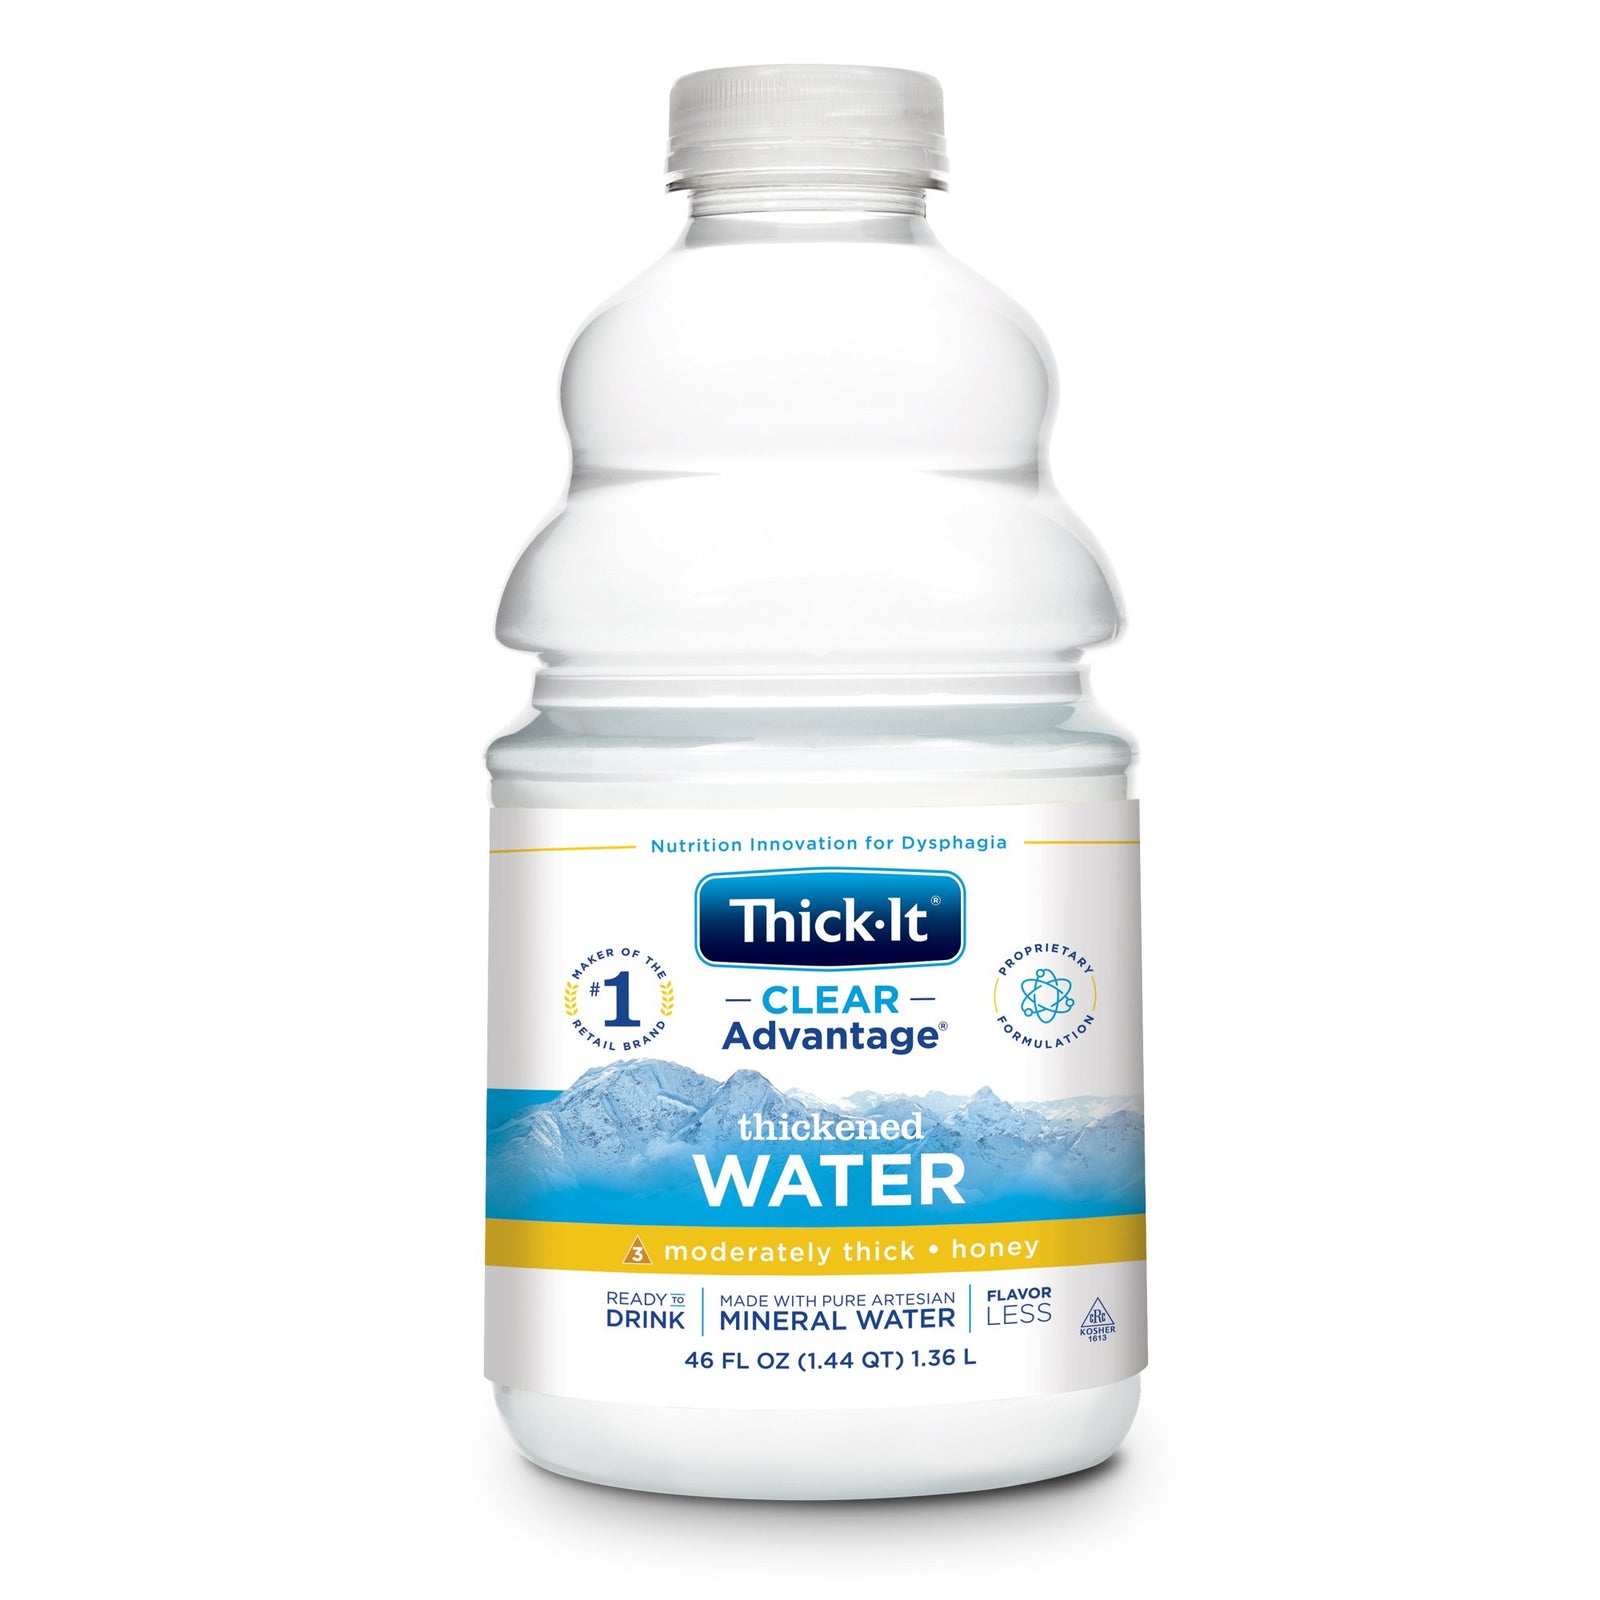 Thick-It Clear Advantage Honey Consistency Thickened Water 48 oz. Bottle / Case of 4